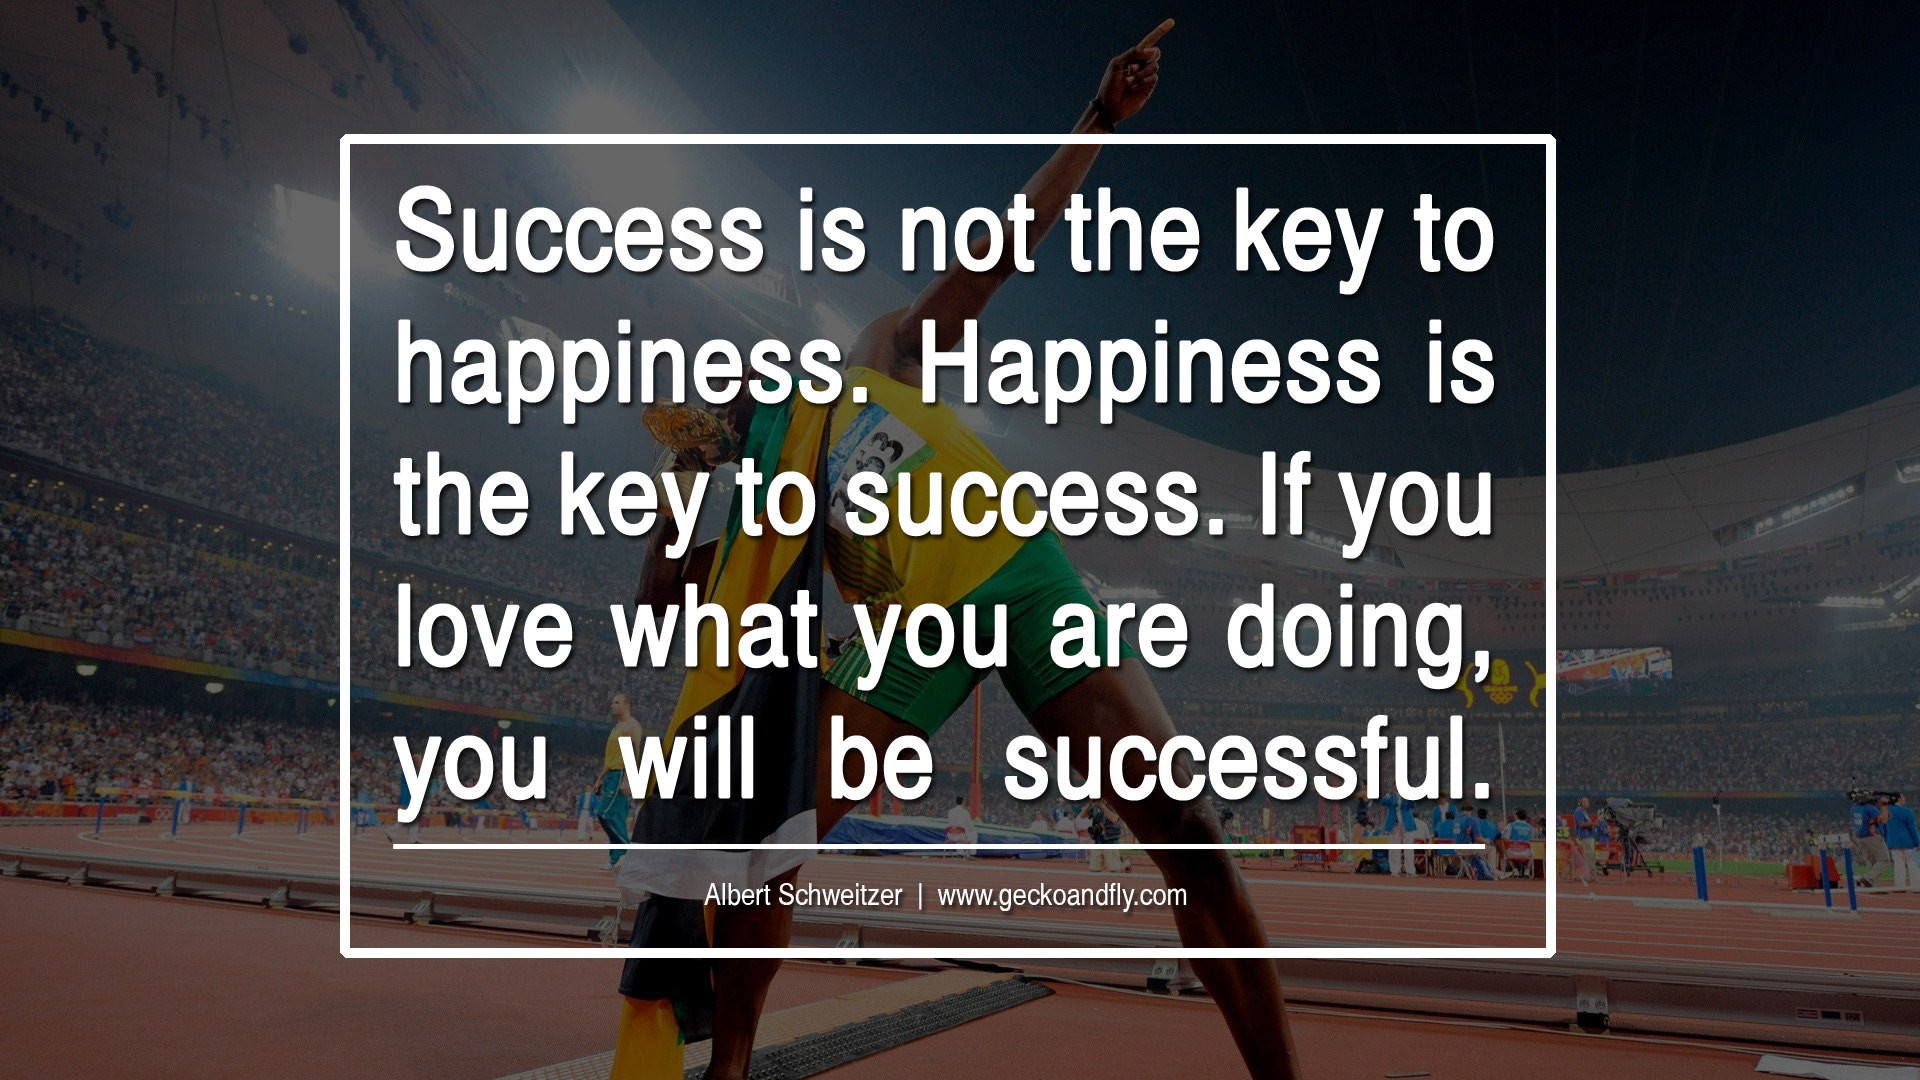 Success Motivational Quotes
 Motivational Quotes For Success In Business QuotesGram